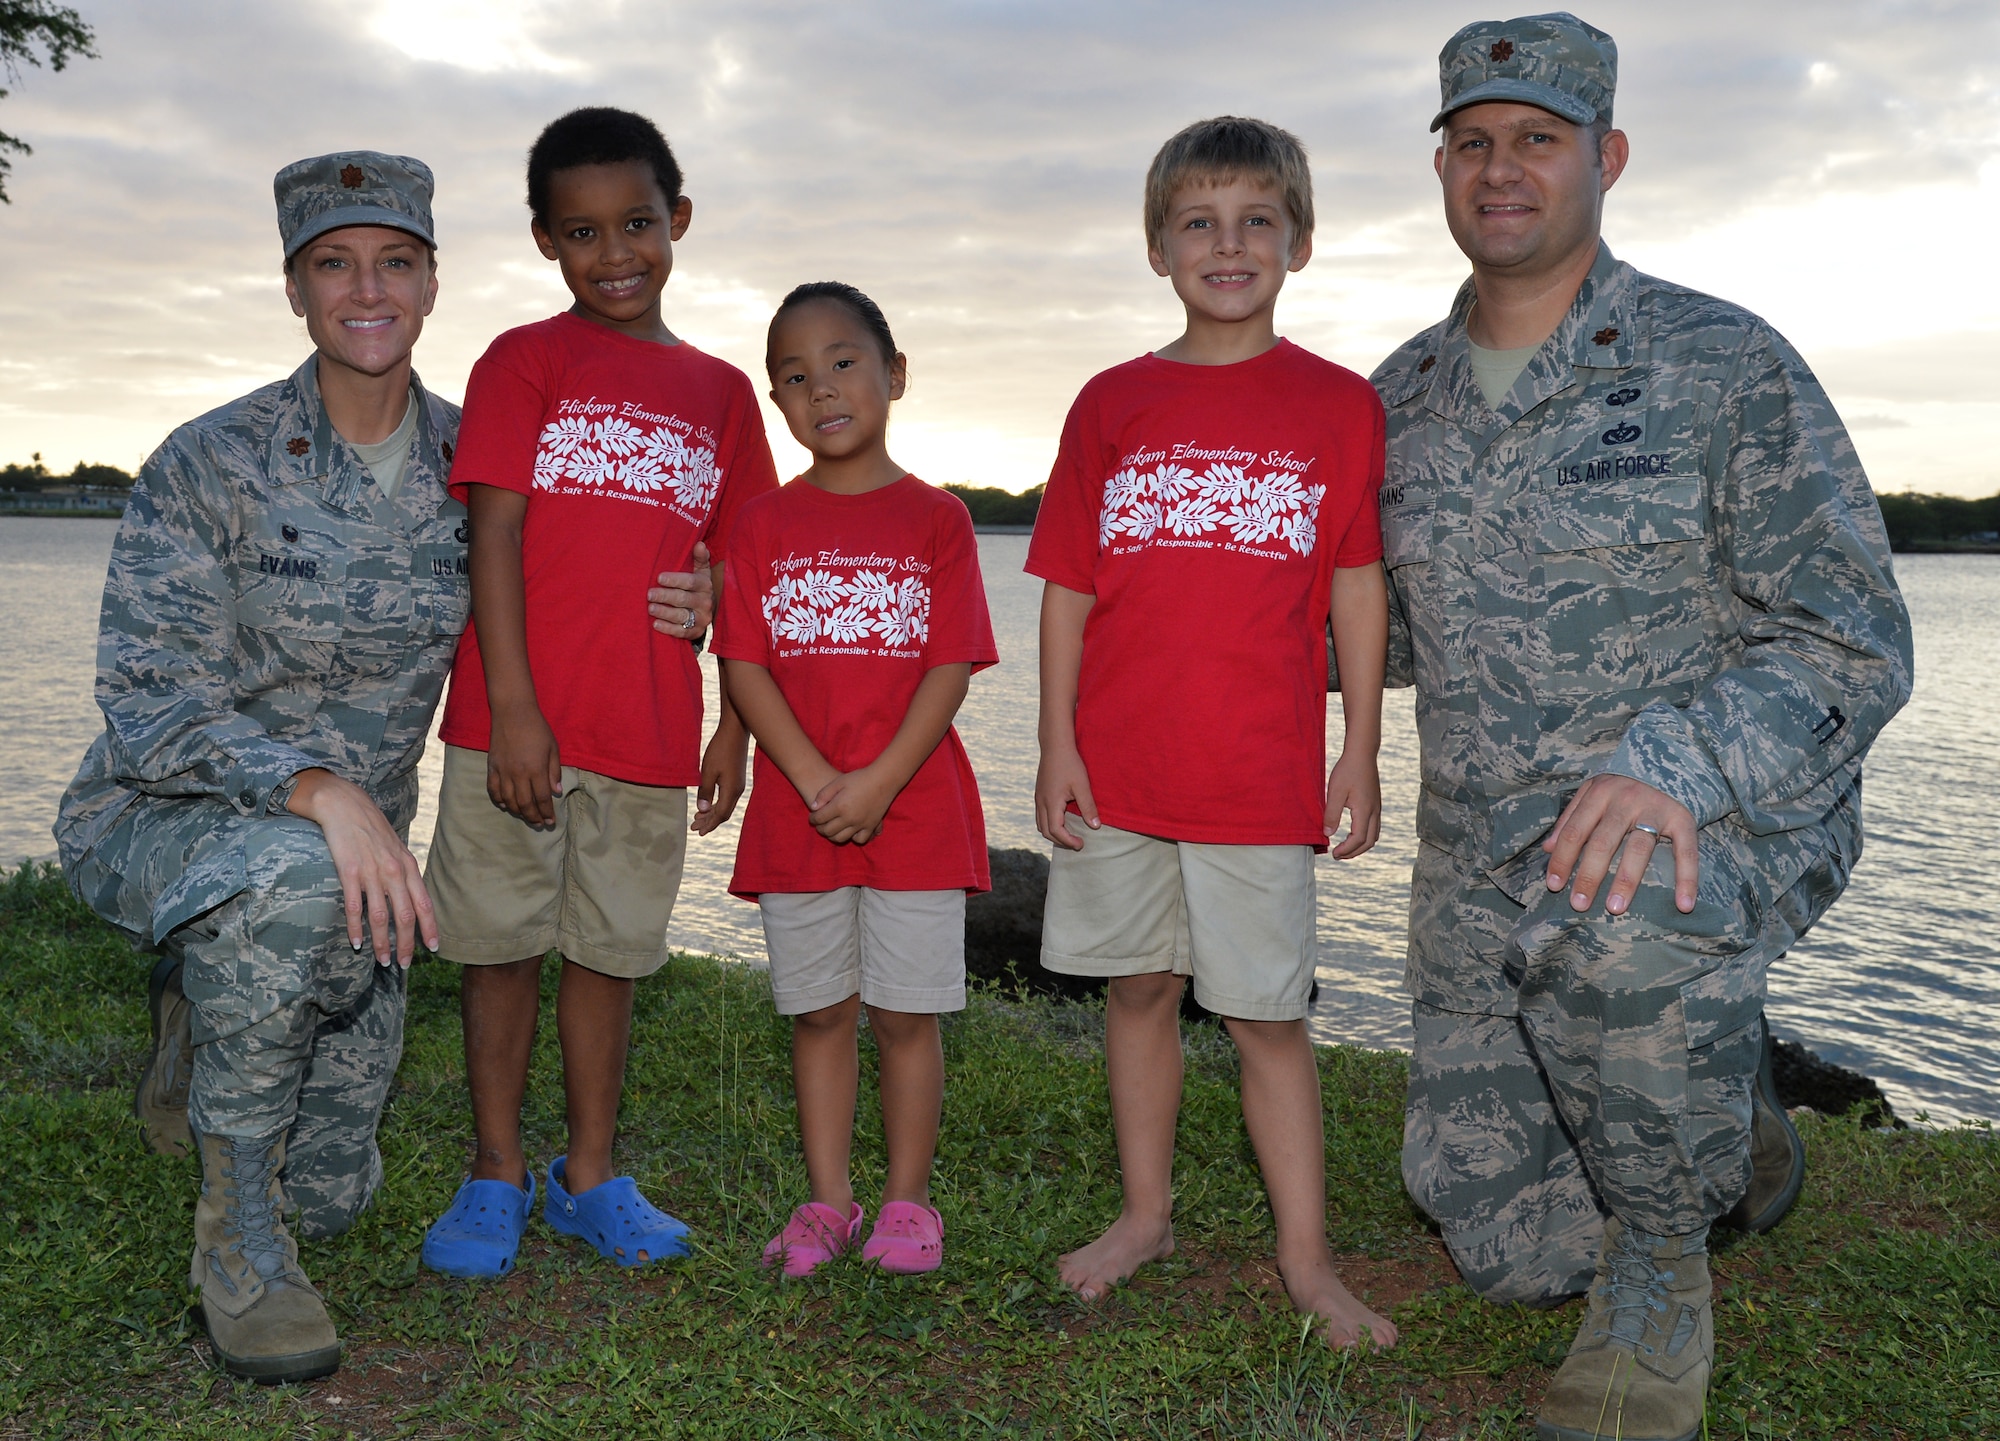 From left, Maj. Amanda Evans, Trevor, Katelyn, Parker, and Maj. Brian Evans pose for a photo Nov. 21, 2014, at Joint Base Pearl Harbor-Hickam, Hawaii. Amanda and Brian adopted Trevor and Katelyn, and Parker is their biological son. Amanda is the 15th Comptroller Squadron commander and Brian is a Special Operations Command Pacific air operations planner. (U.S. Air Force photo/Staff Sgt. Alexander Martinez) 